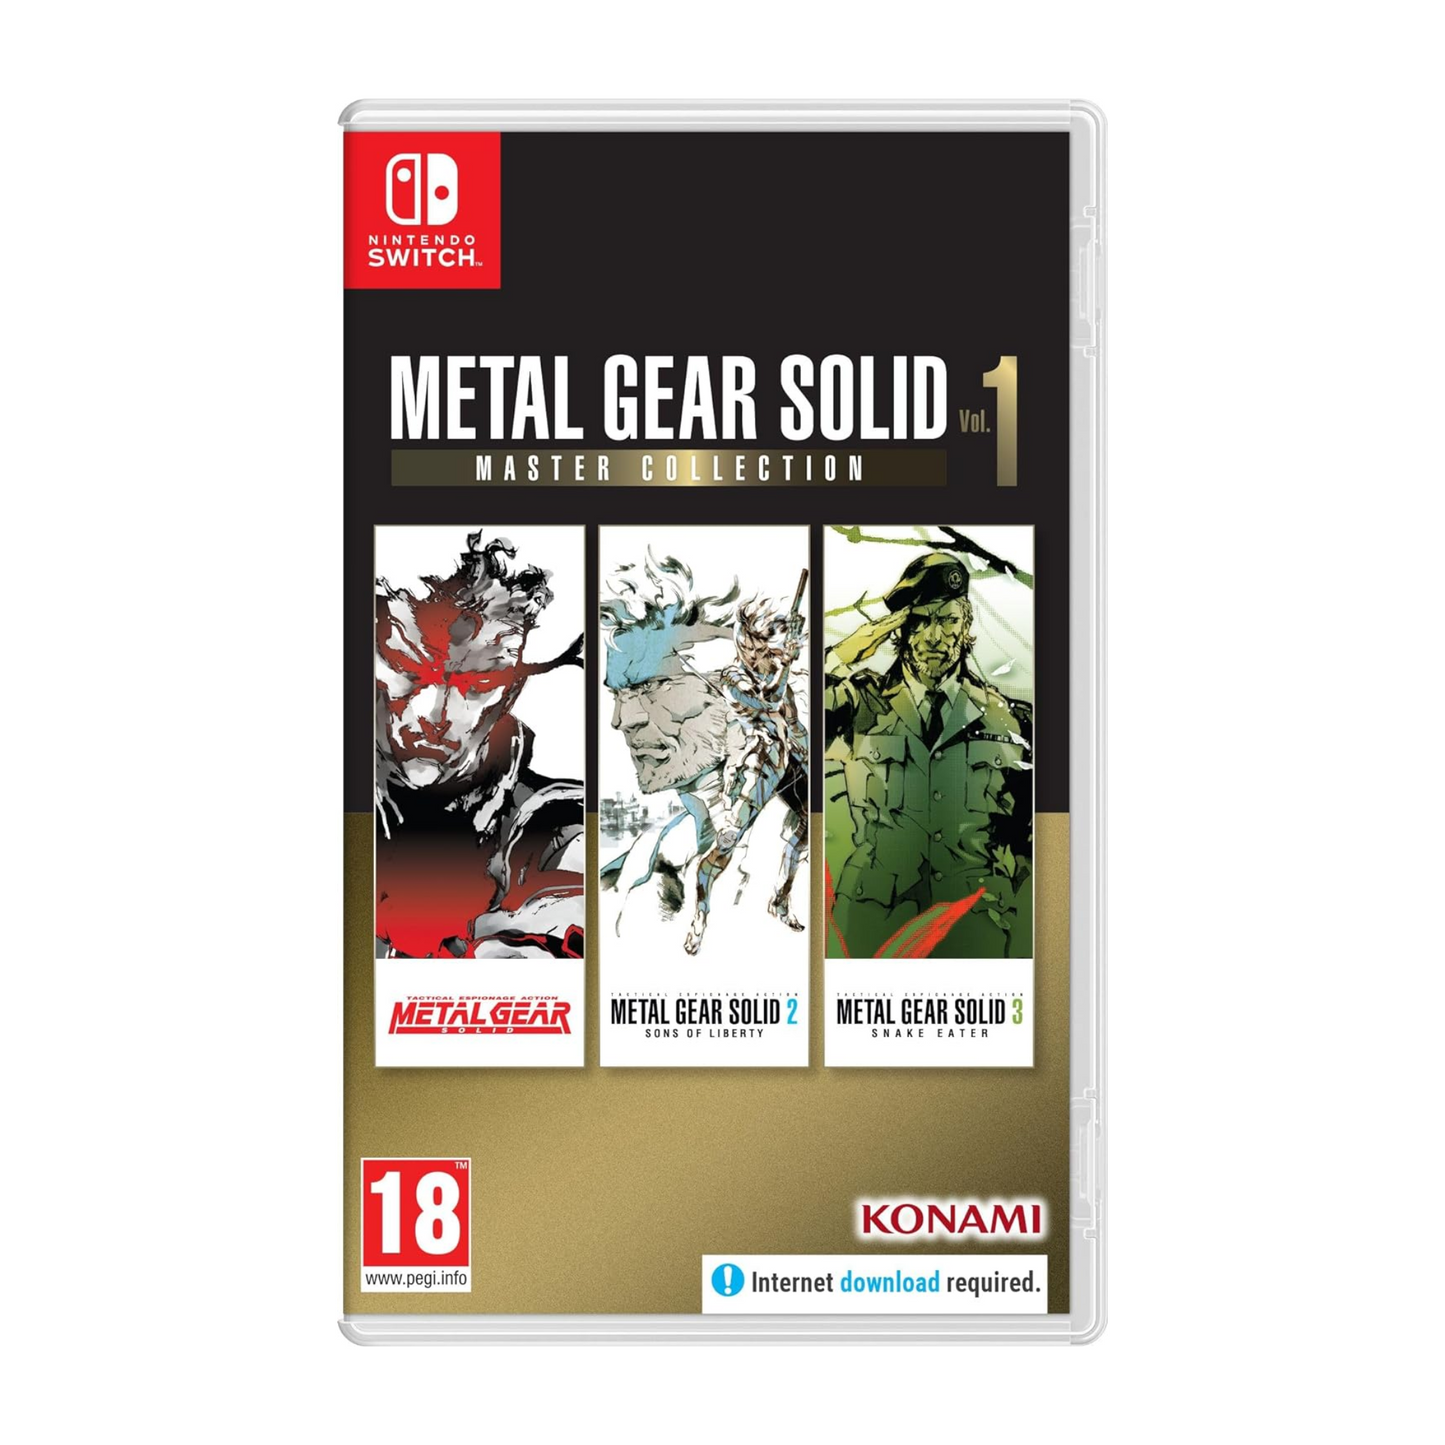 Metal Gear solid vol 1 Master Collection Video Game for Nintendo Switch